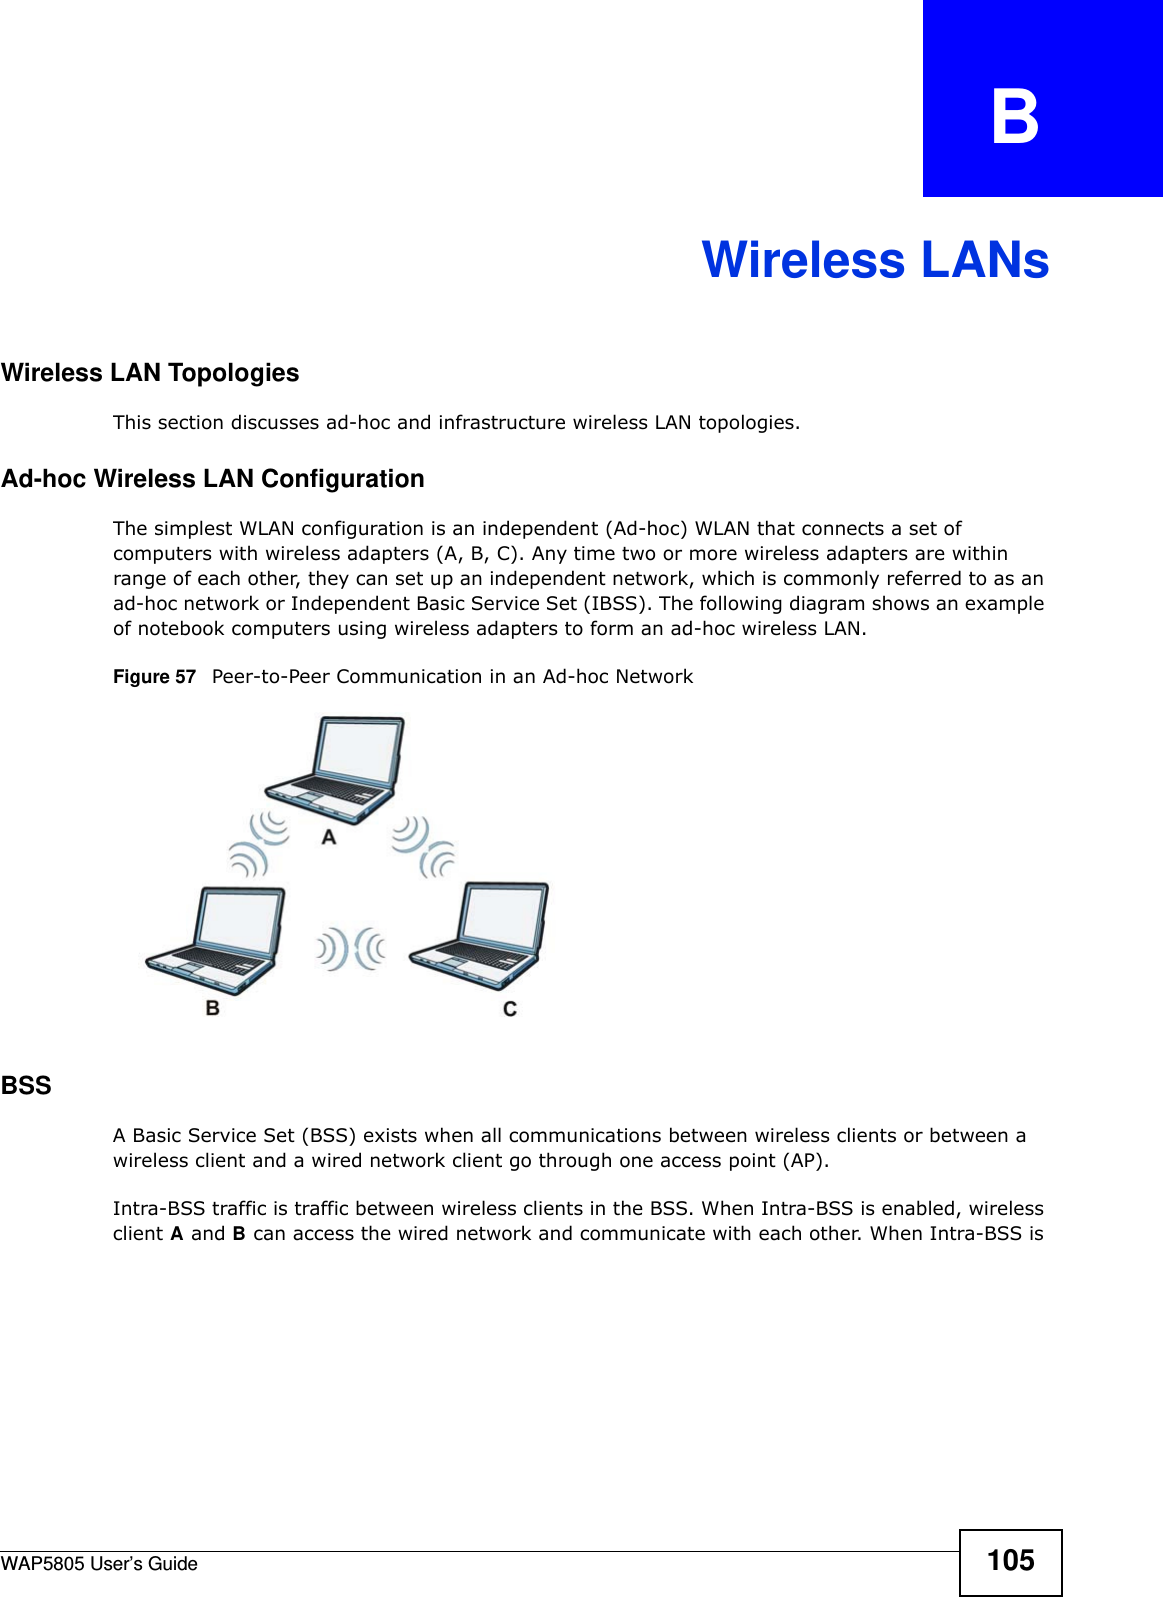 WAP5805 User’s Guide 105APPENDIX   BWireless LANsWireless LAN TopologiesThis section discusses ad-hoc and infrastructure wireless LAN topologies.Ad-hoc Wireless LAN ConfigurationThe simplest WLAN configuration is an independent (Ad-hoc) WLAN that connects a set of computers with wireless adapters (A, B, C). Any time two or more wireless adapters are within range of each other, they can set up an independent network, which is commonly referred to as an ad-hoc network or Independent Basic Service Set (IBSS). The following diagram shows an example of notebook computers using wireless adapters to form an ad-hoc wireless LAN. Figure 57   Peer-to-Peer Communication in an Ad-hoc NetworkBSSA Basic Service Set (BSS) exists when all communications between wireless clients or between a wireless client and a wired network client go through one access point (AP). Intra-BSS traffic is traffic between wireless clients in the BSS. When Intra-BSS is enabled, wireless client A and B can access the wired network and communicate with each other. When Intra-BSS is 